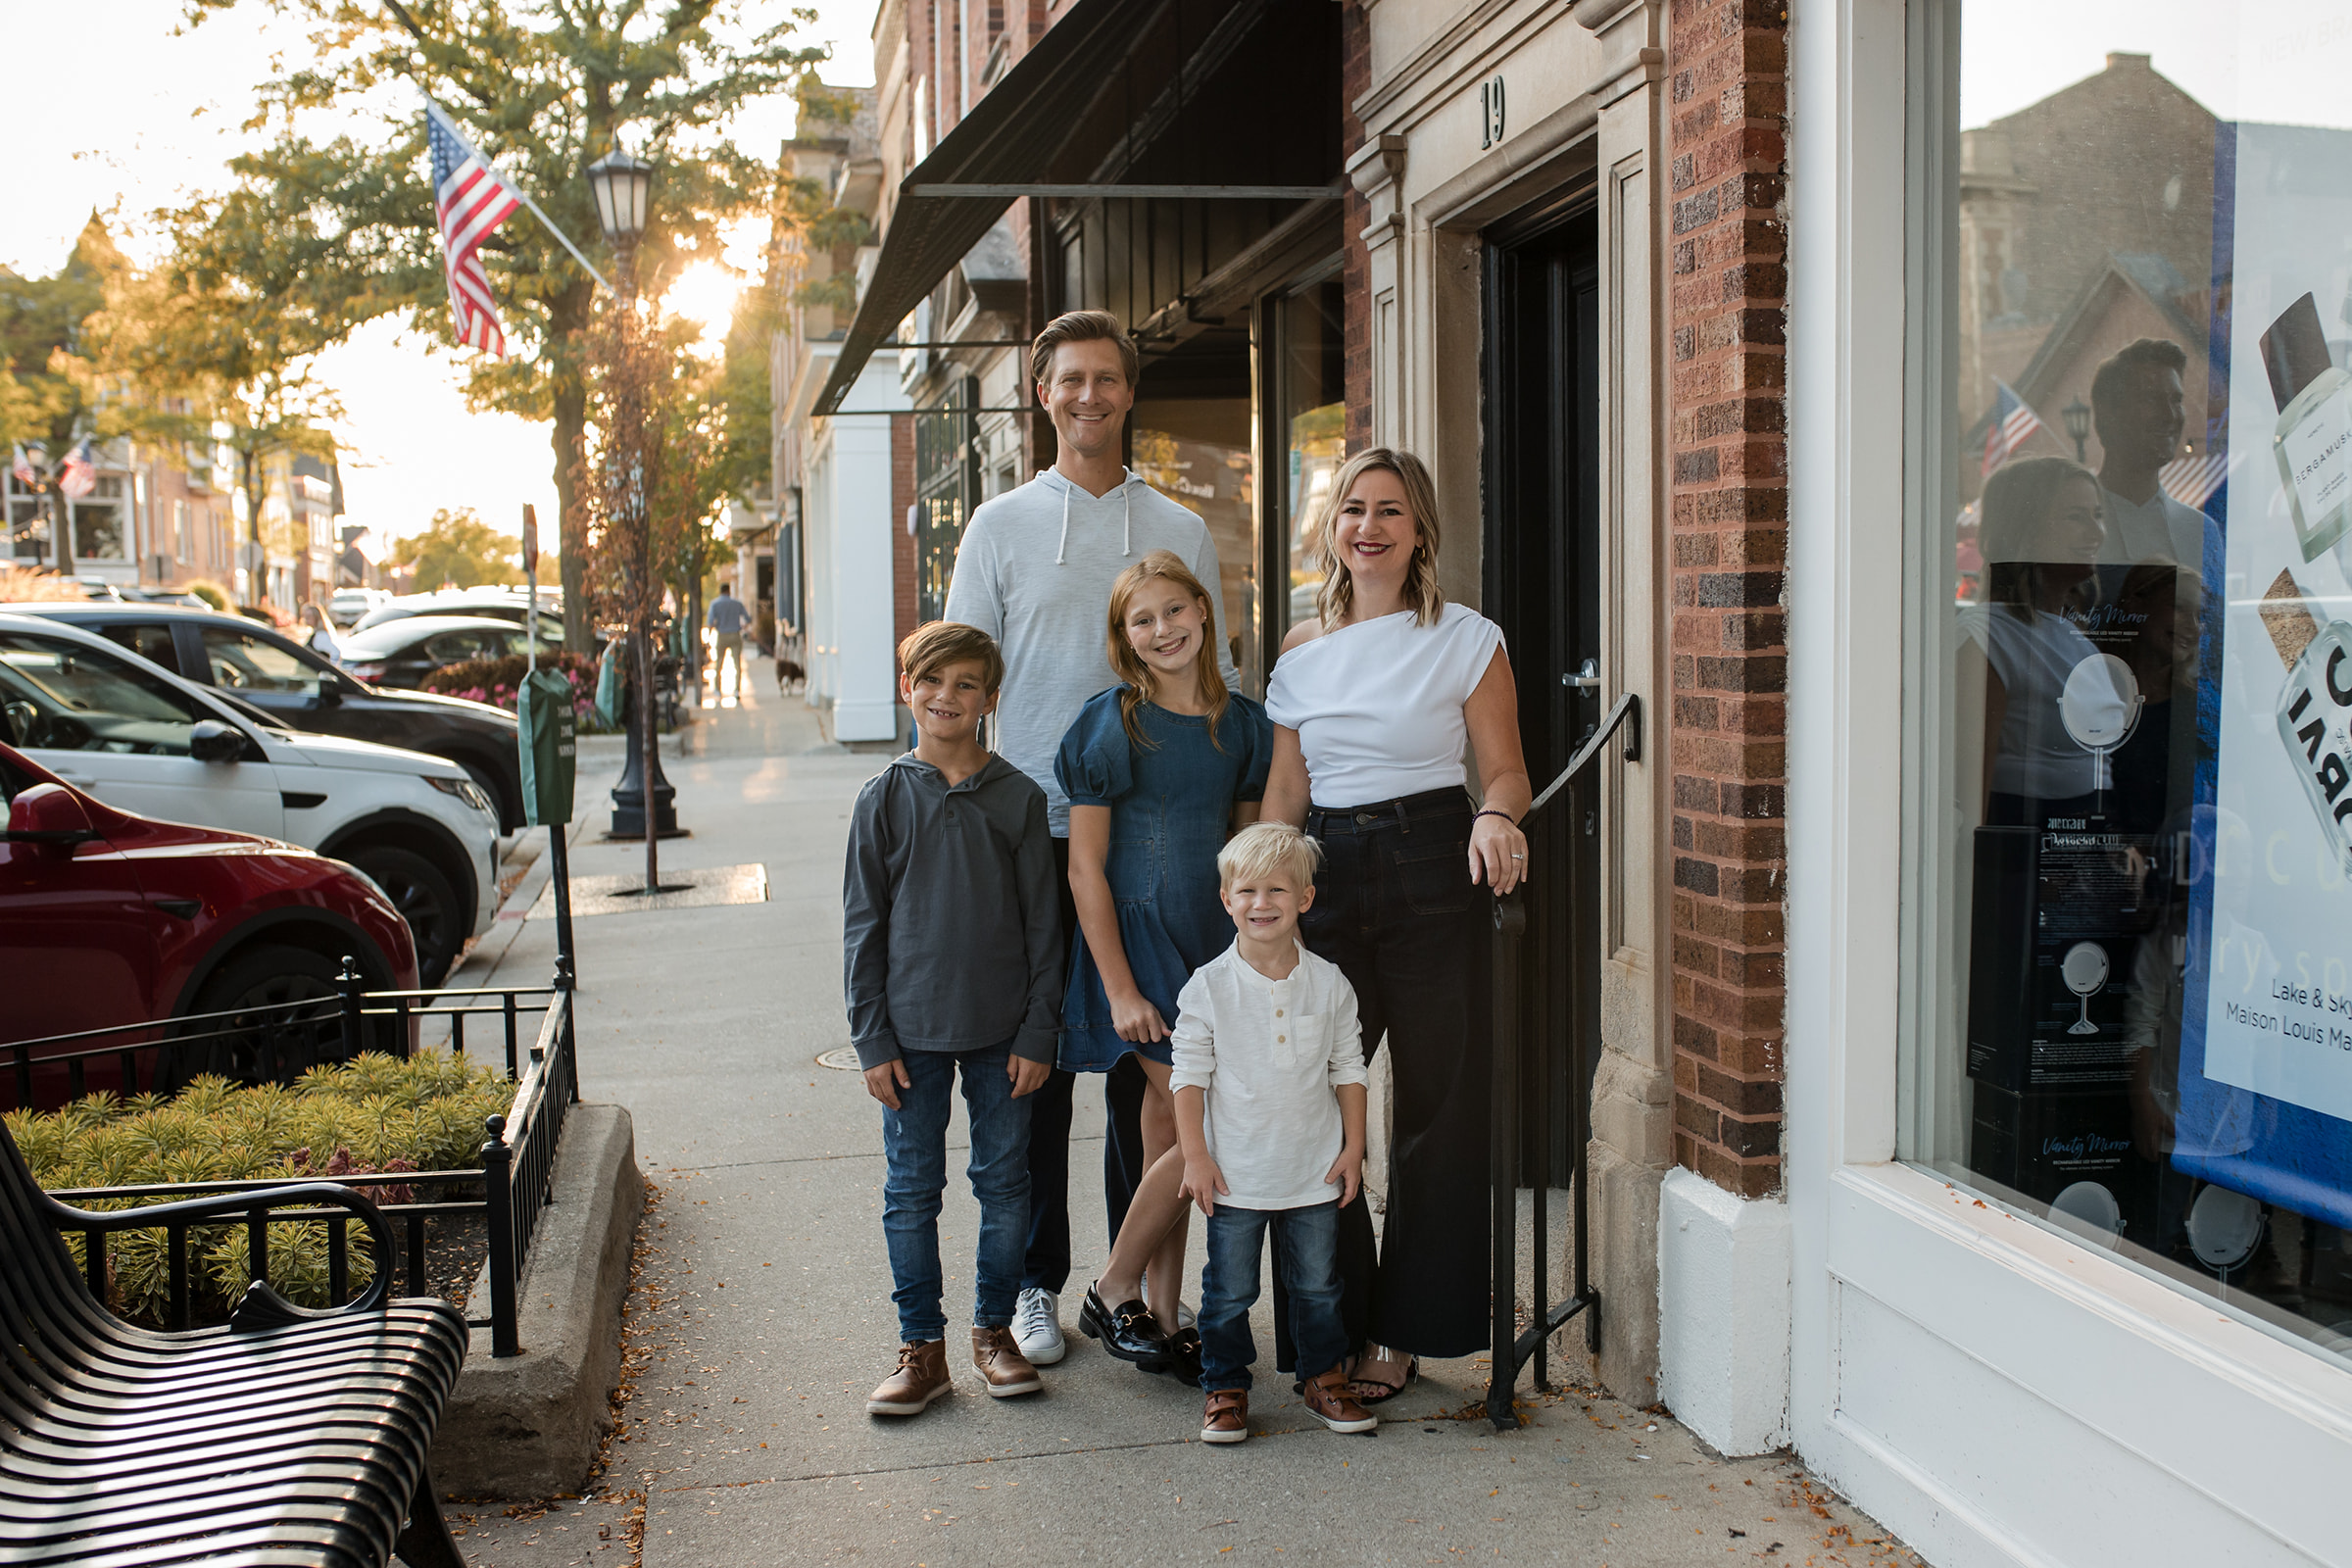 End of summer outdoor family session at sunset in downtown Hinsdale.